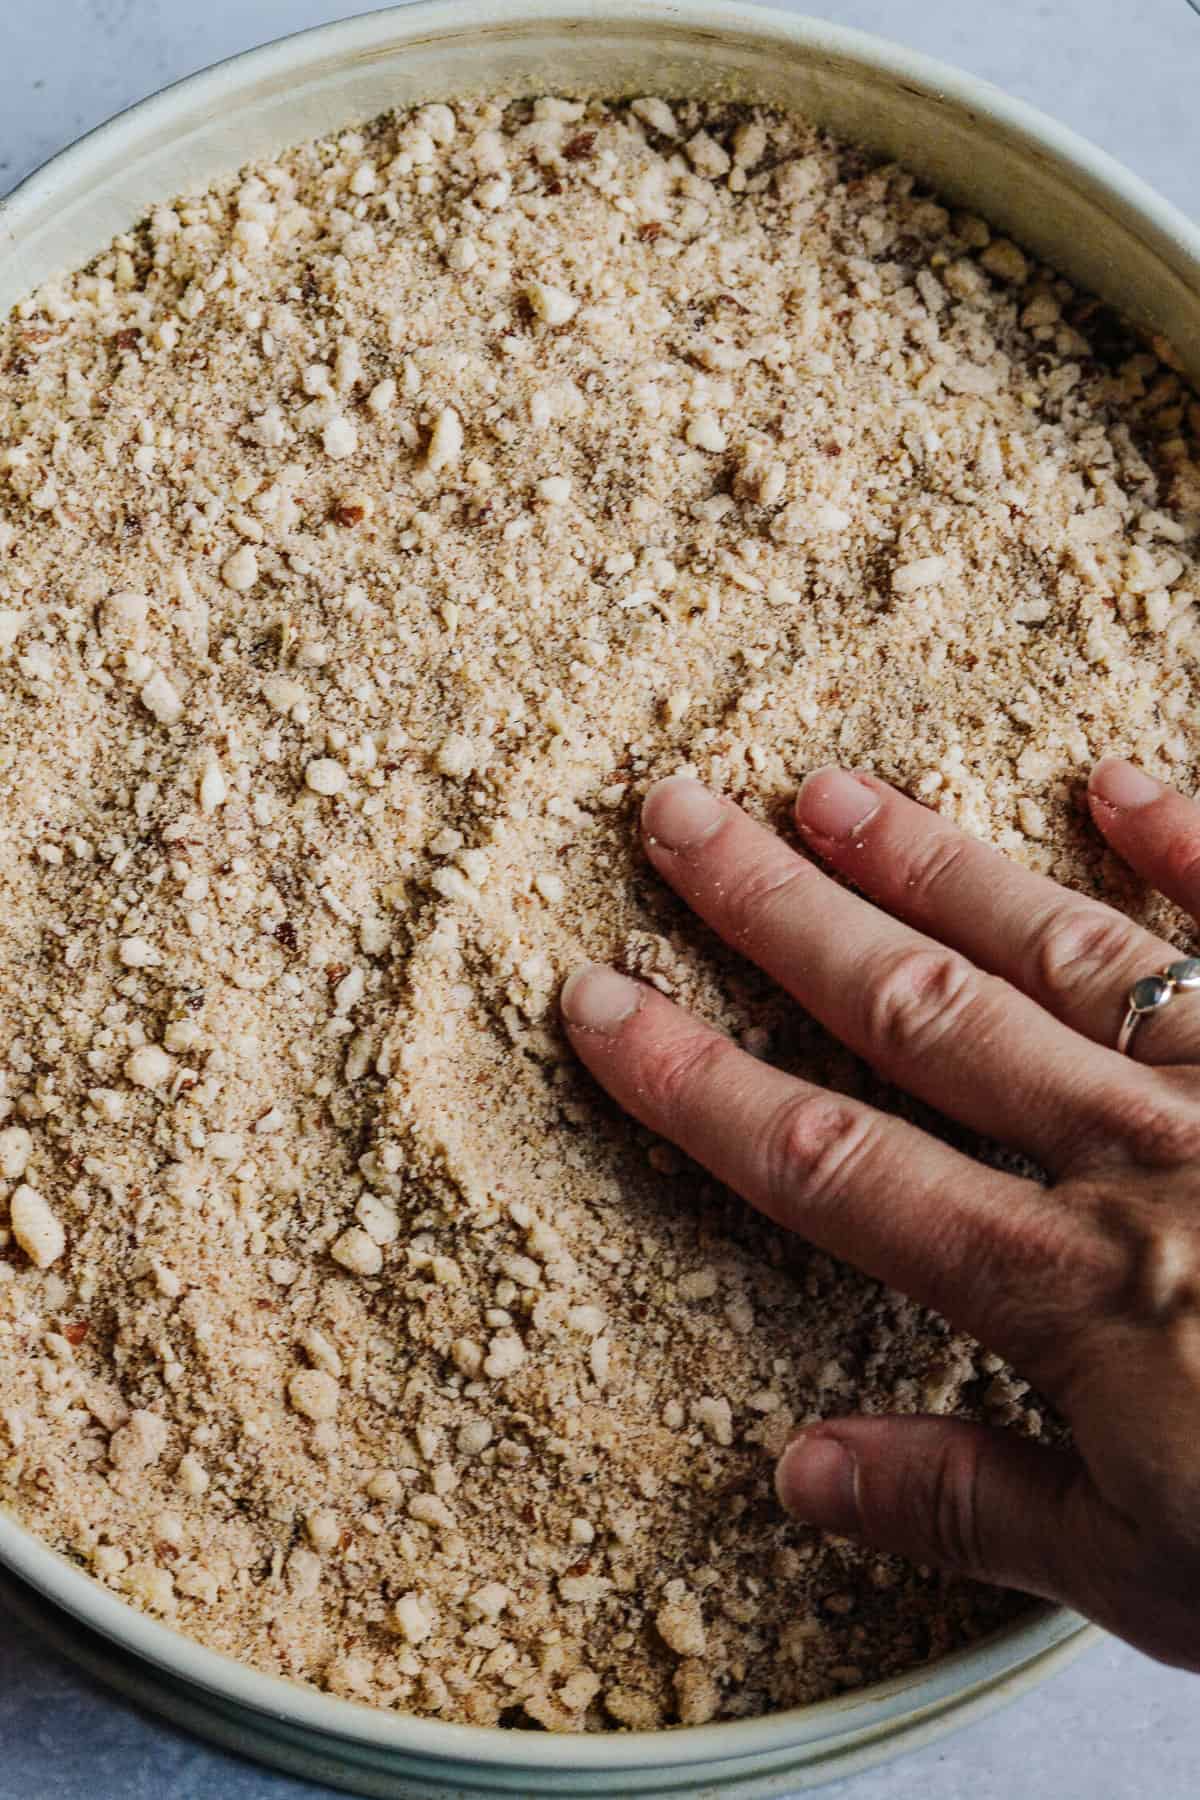 Crumb topping added to cake with hand spreading.